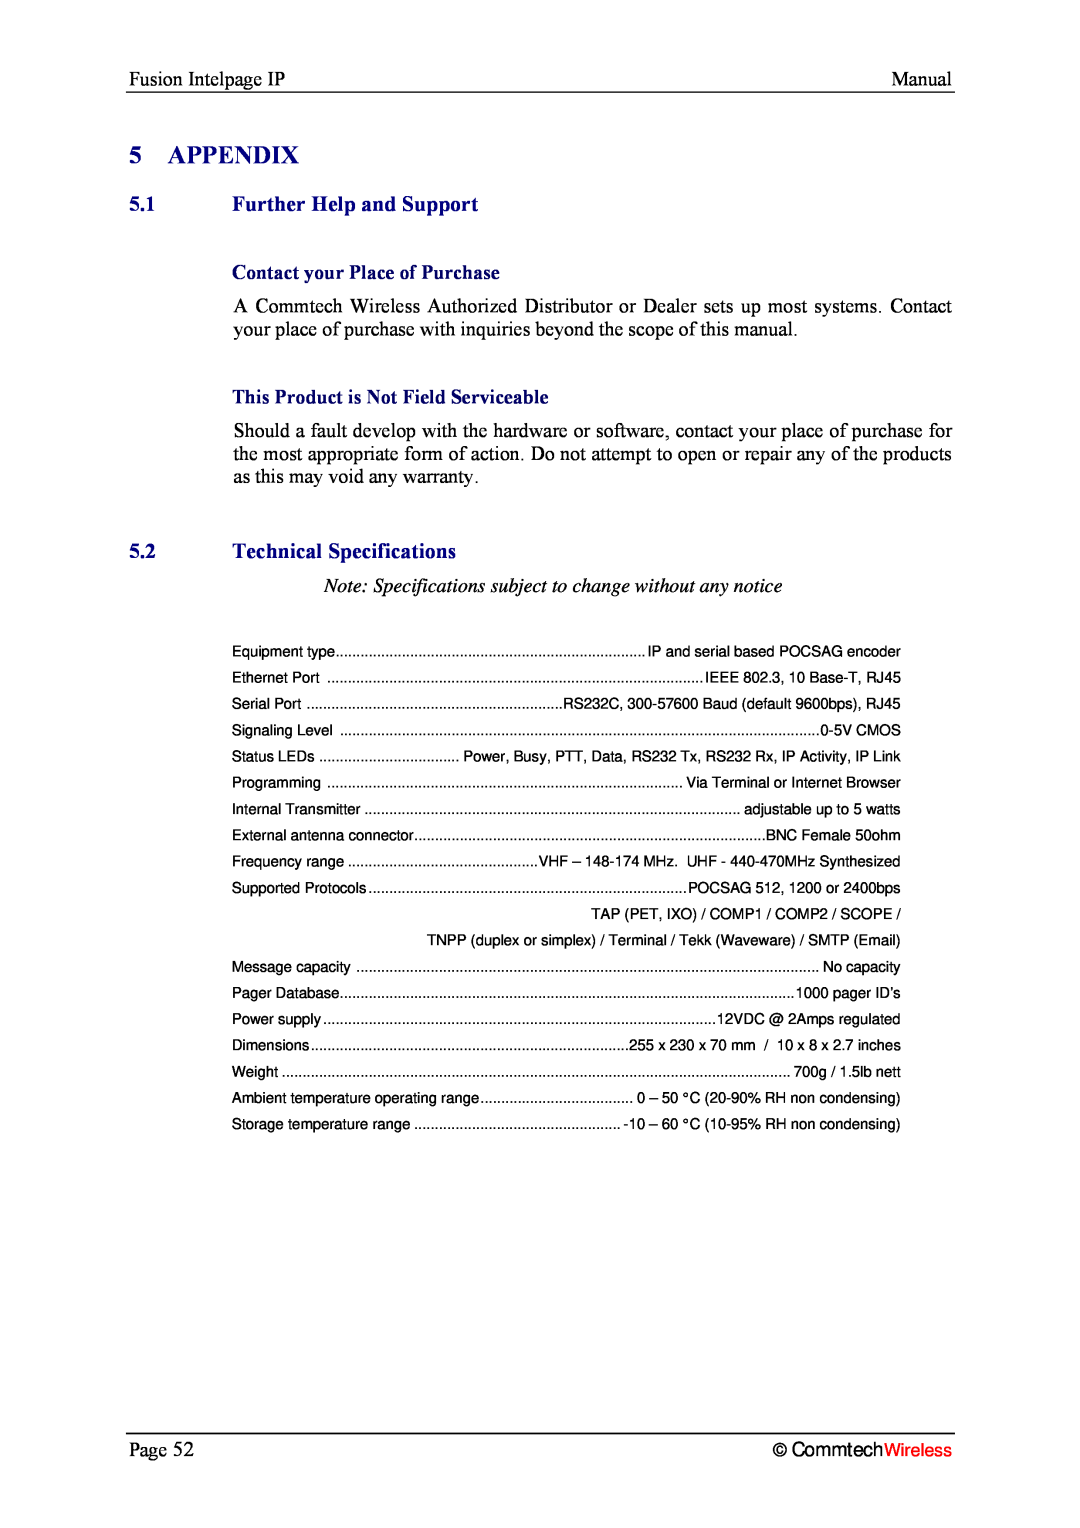 Fusion 2.1 manual Appendix, 5.1Further Help and Support, 5.2Technical Specifications, Contact your Place of Purchase 